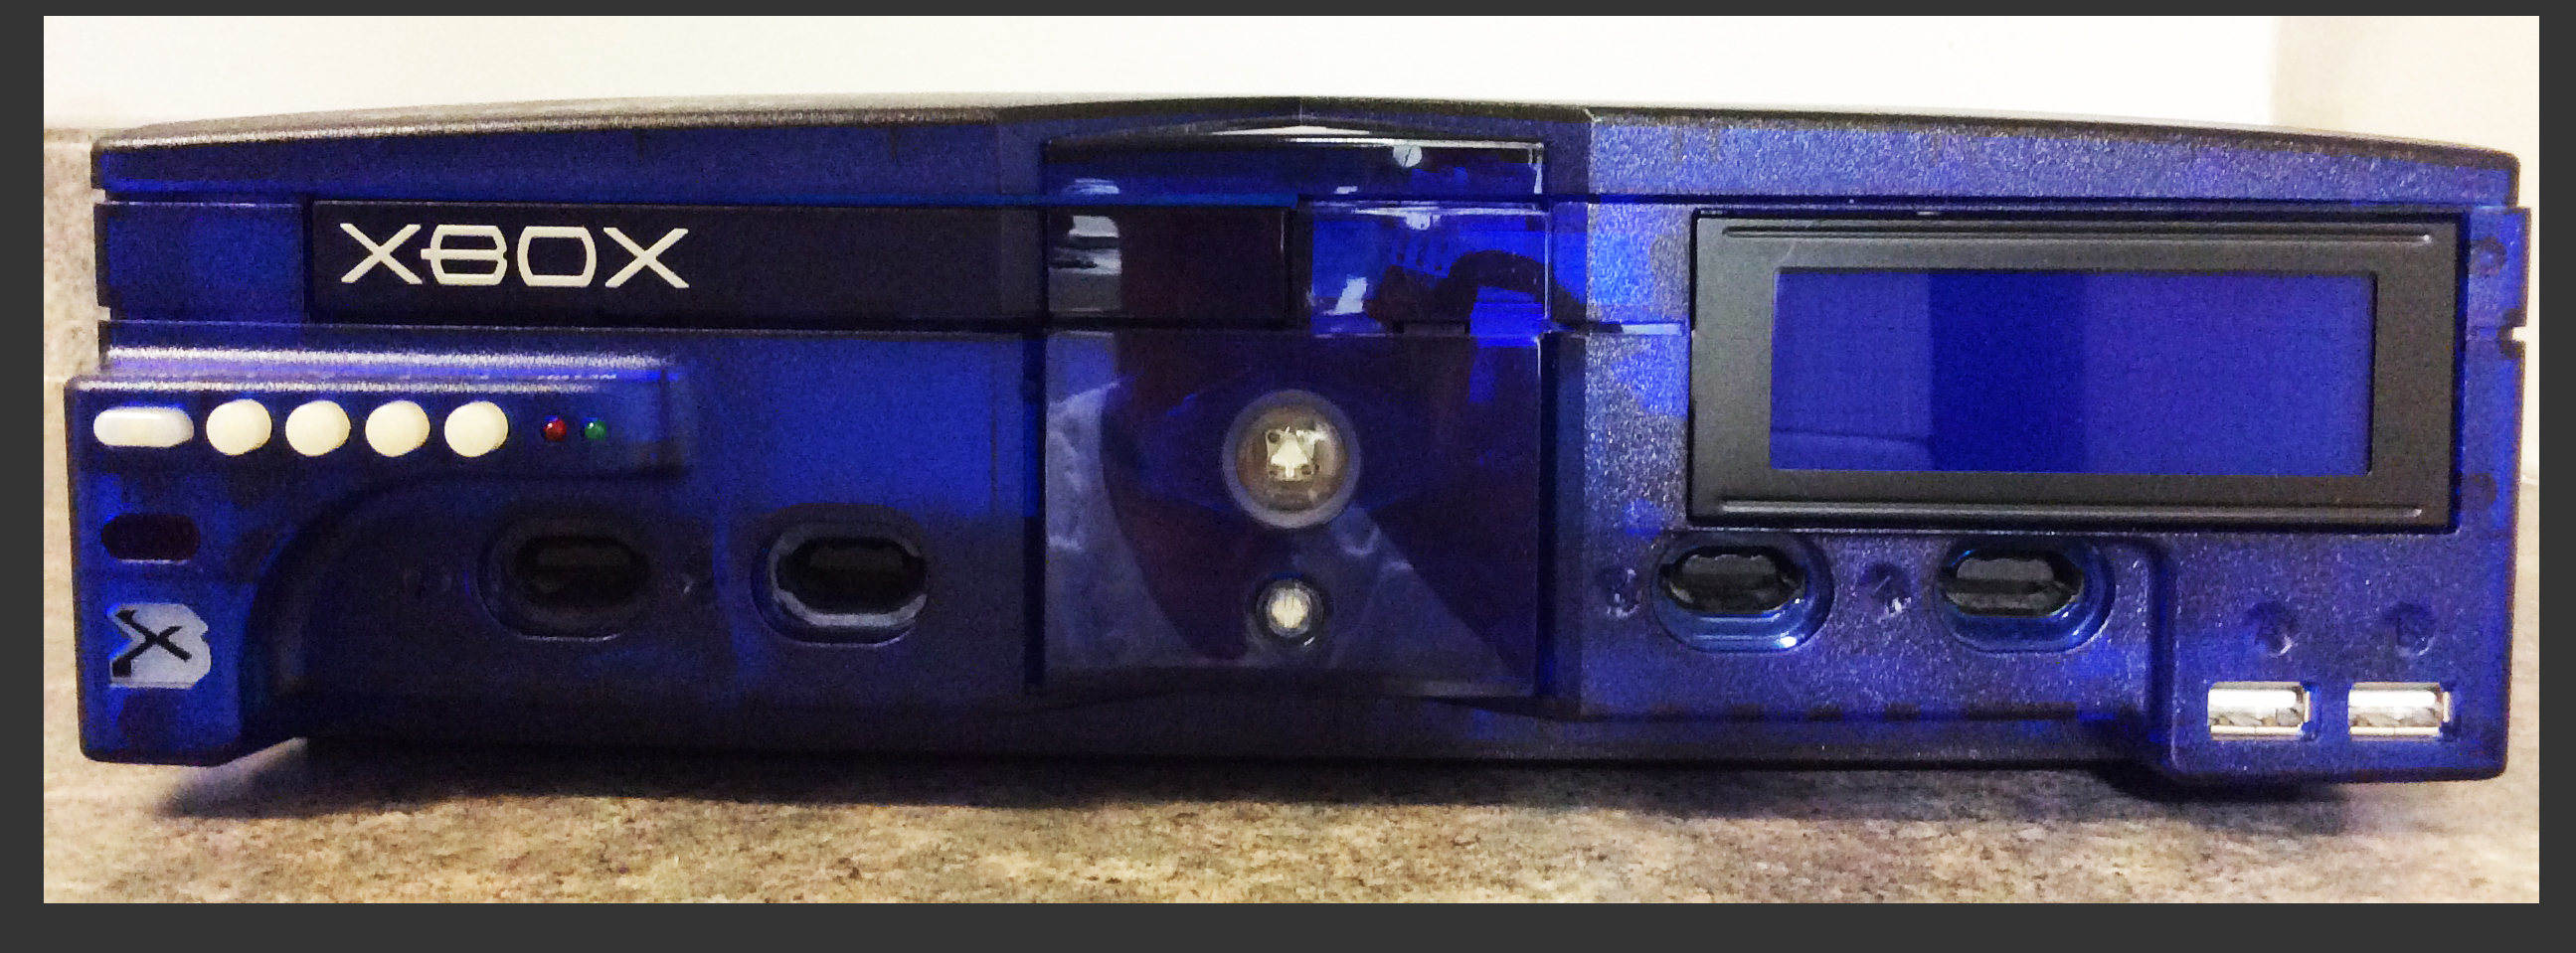 modded xbox with xecuter 3 control panel